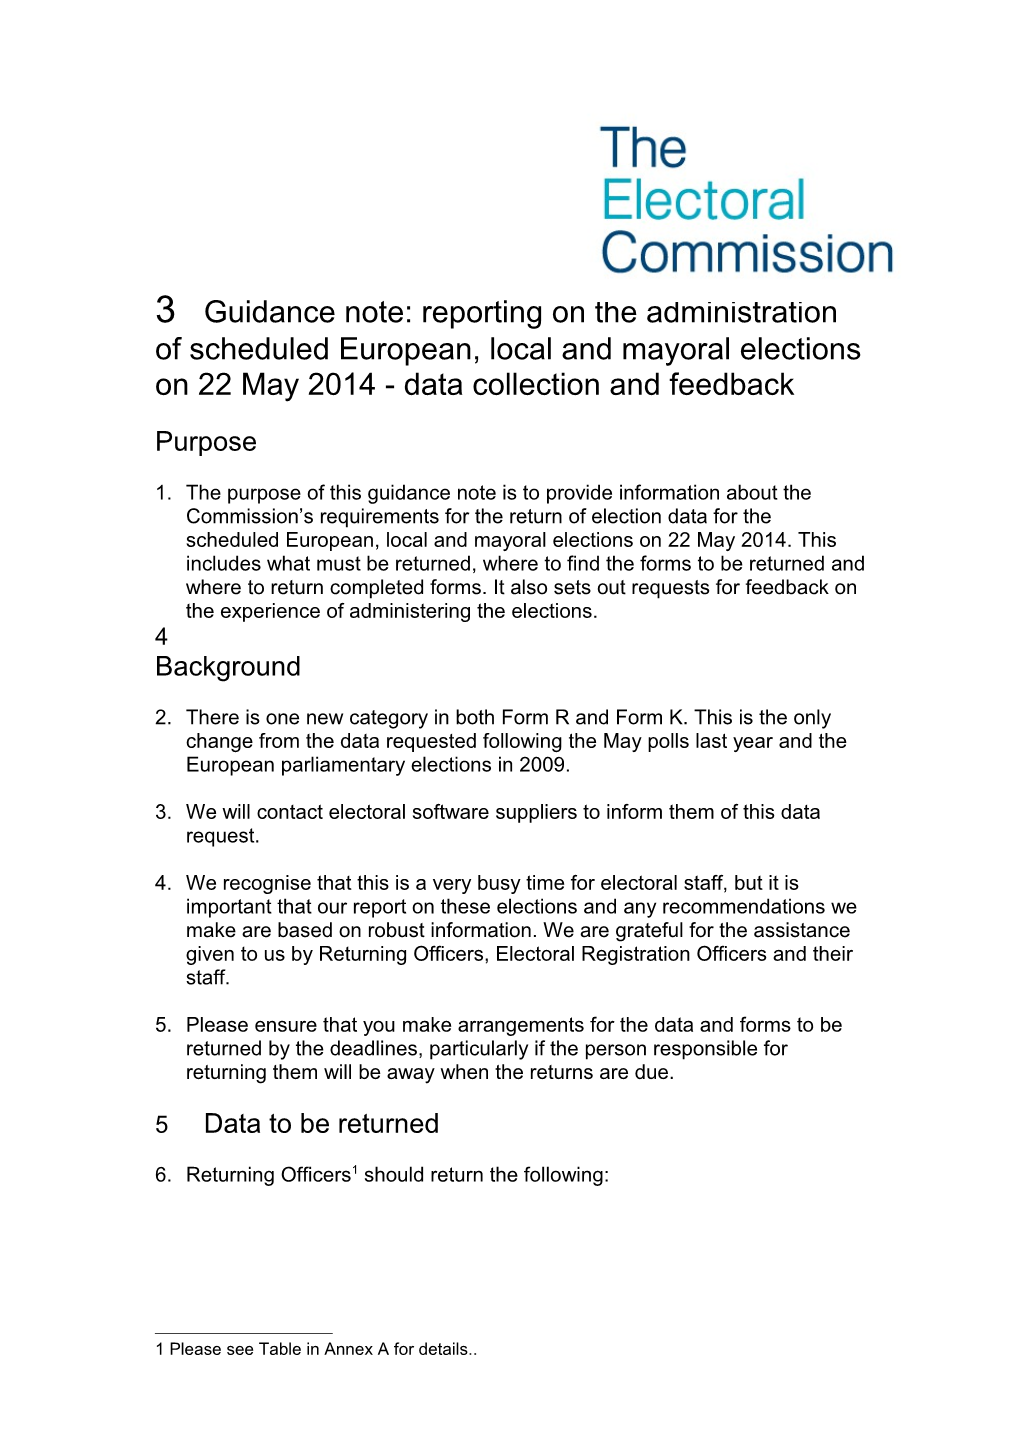 Guidance Note: Reporting on the Administration of Scheduled European, Localand Mayoral